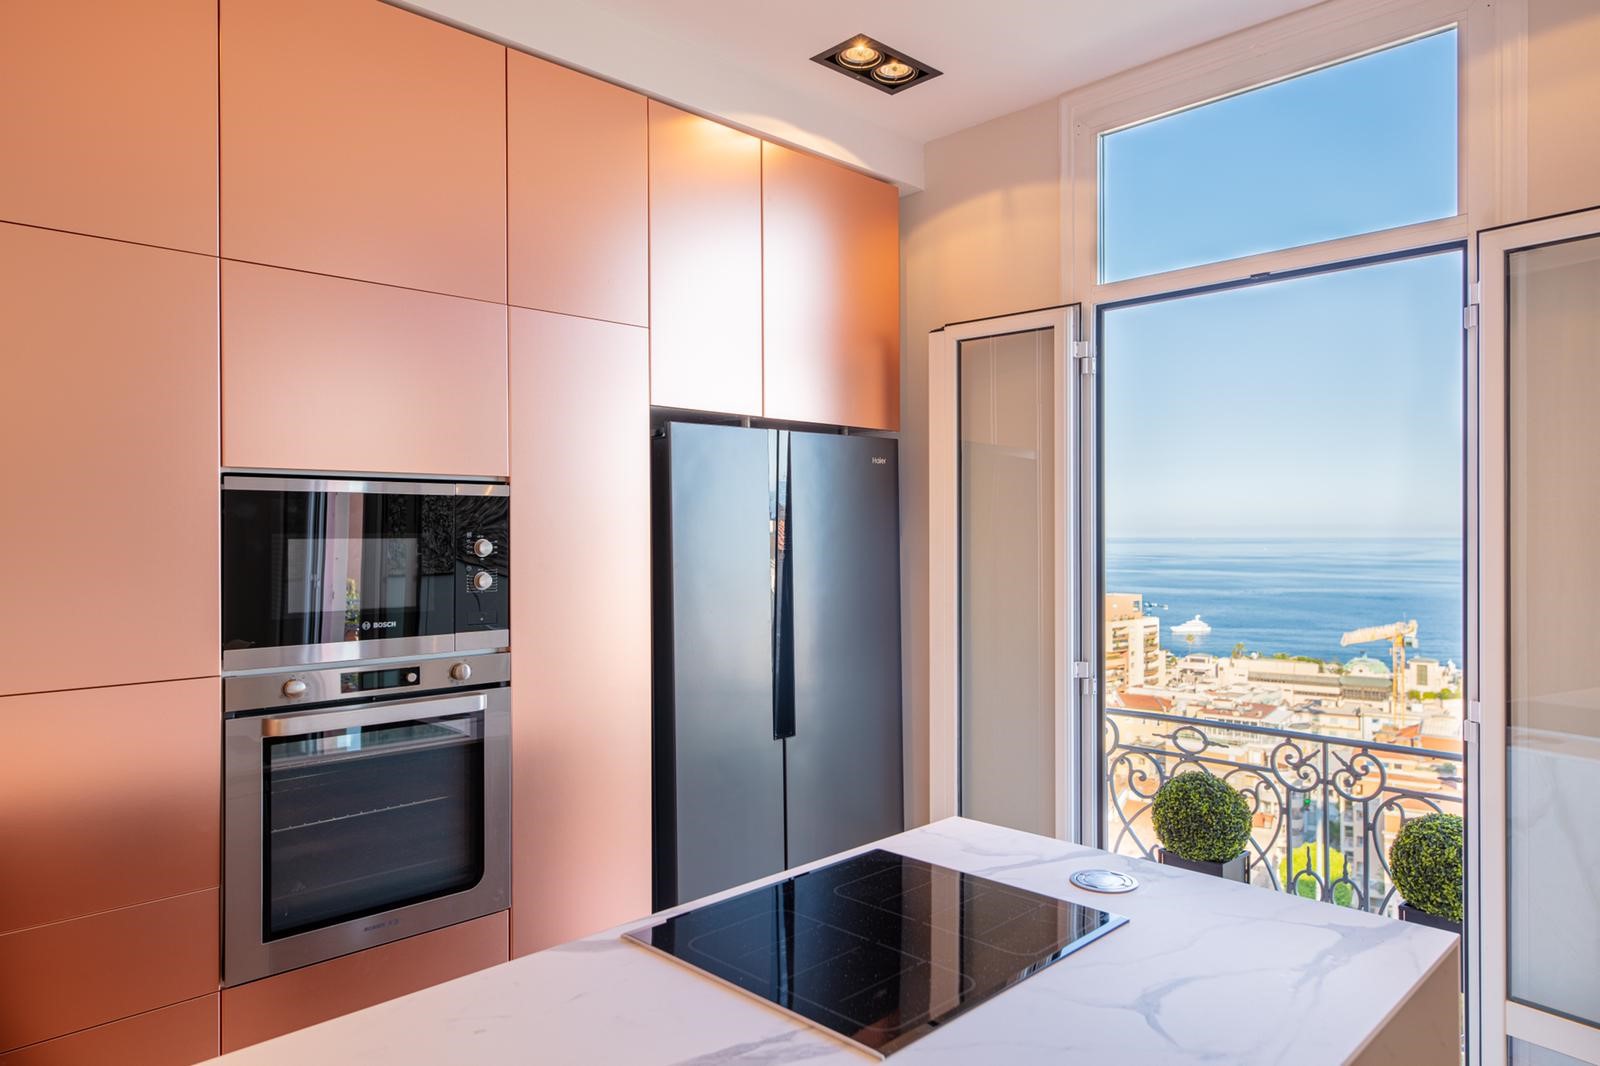 Penthouse on the border with Monaco